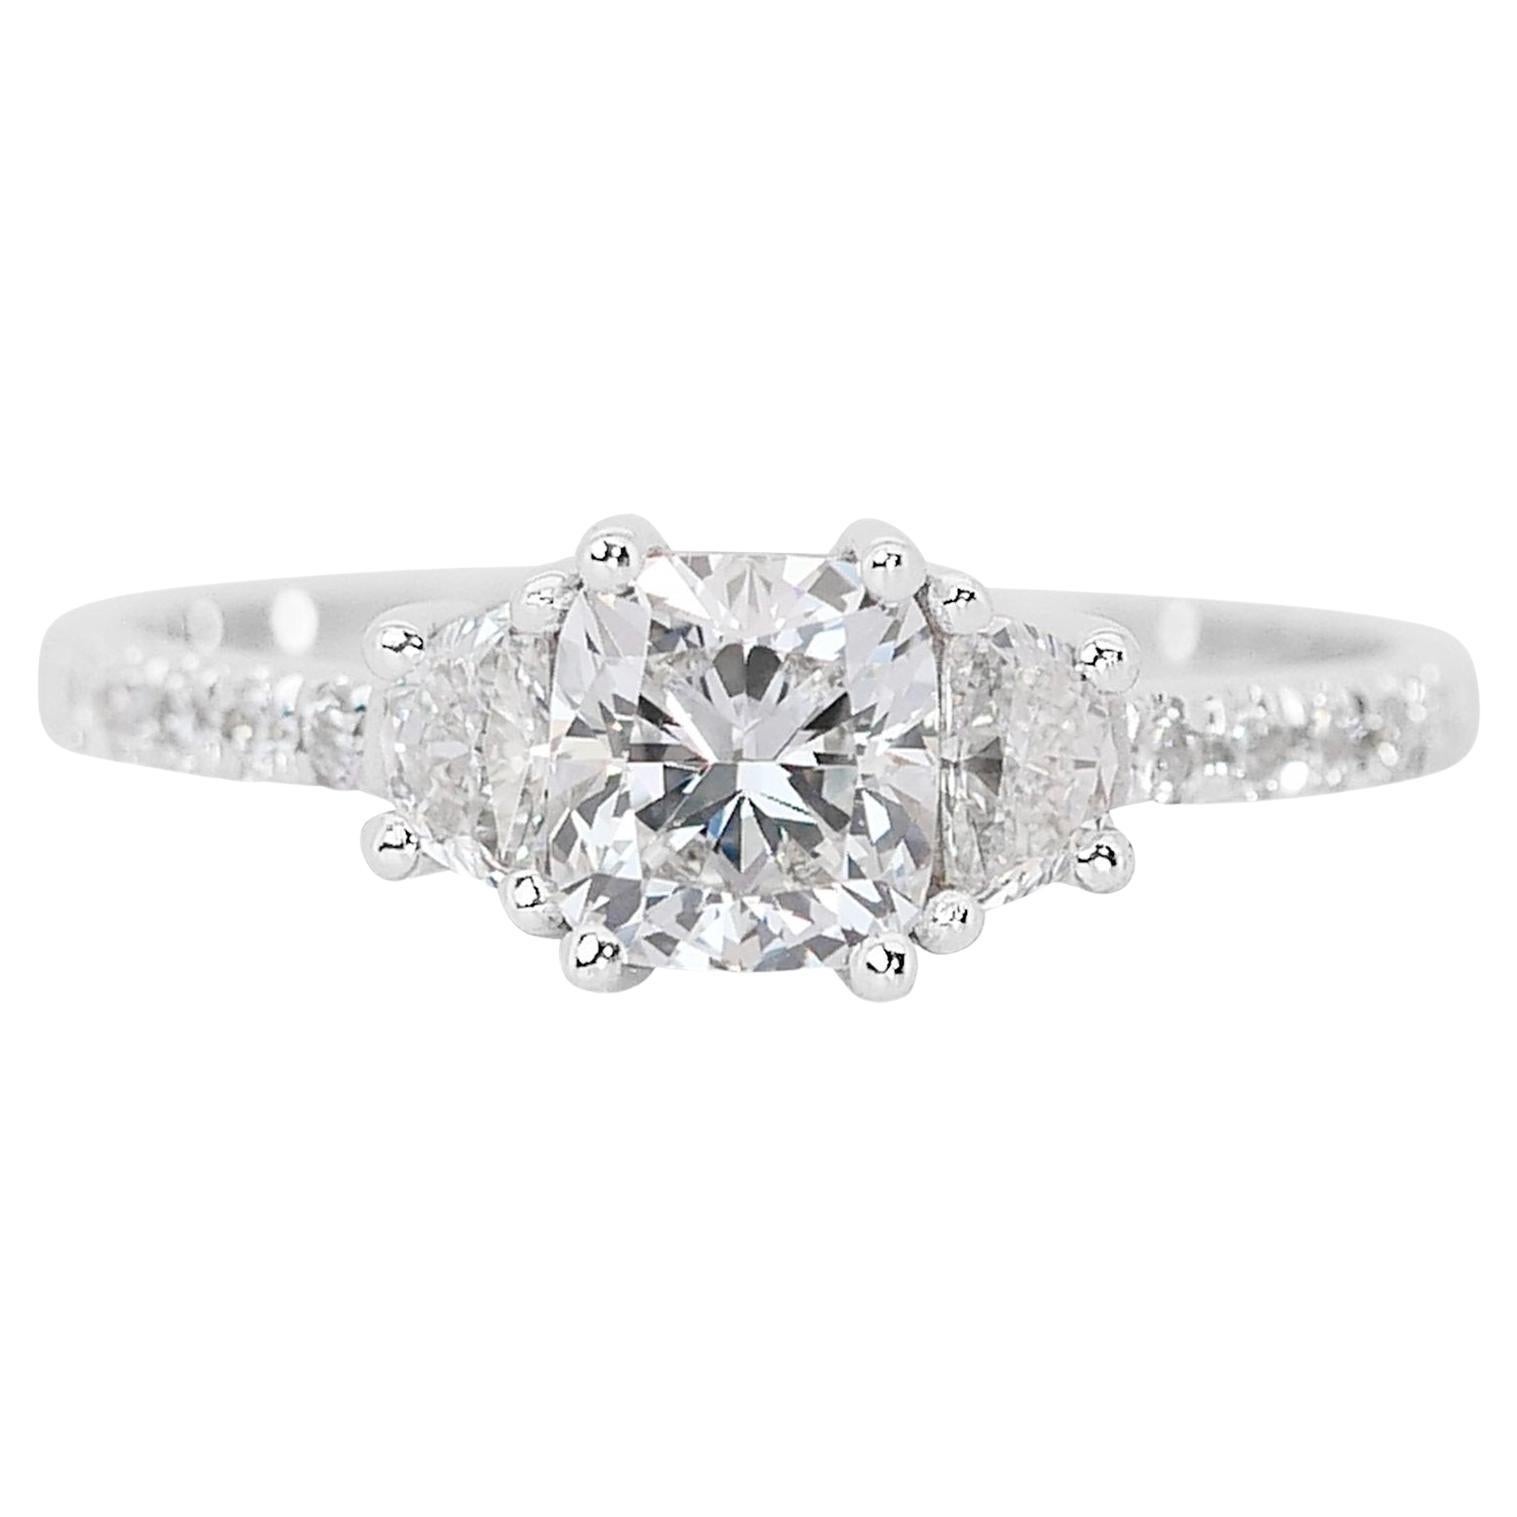 Dazzling 1.40ct Diamonds 3-Stone Ring in 18k White Gold - GIA Certified For Sale